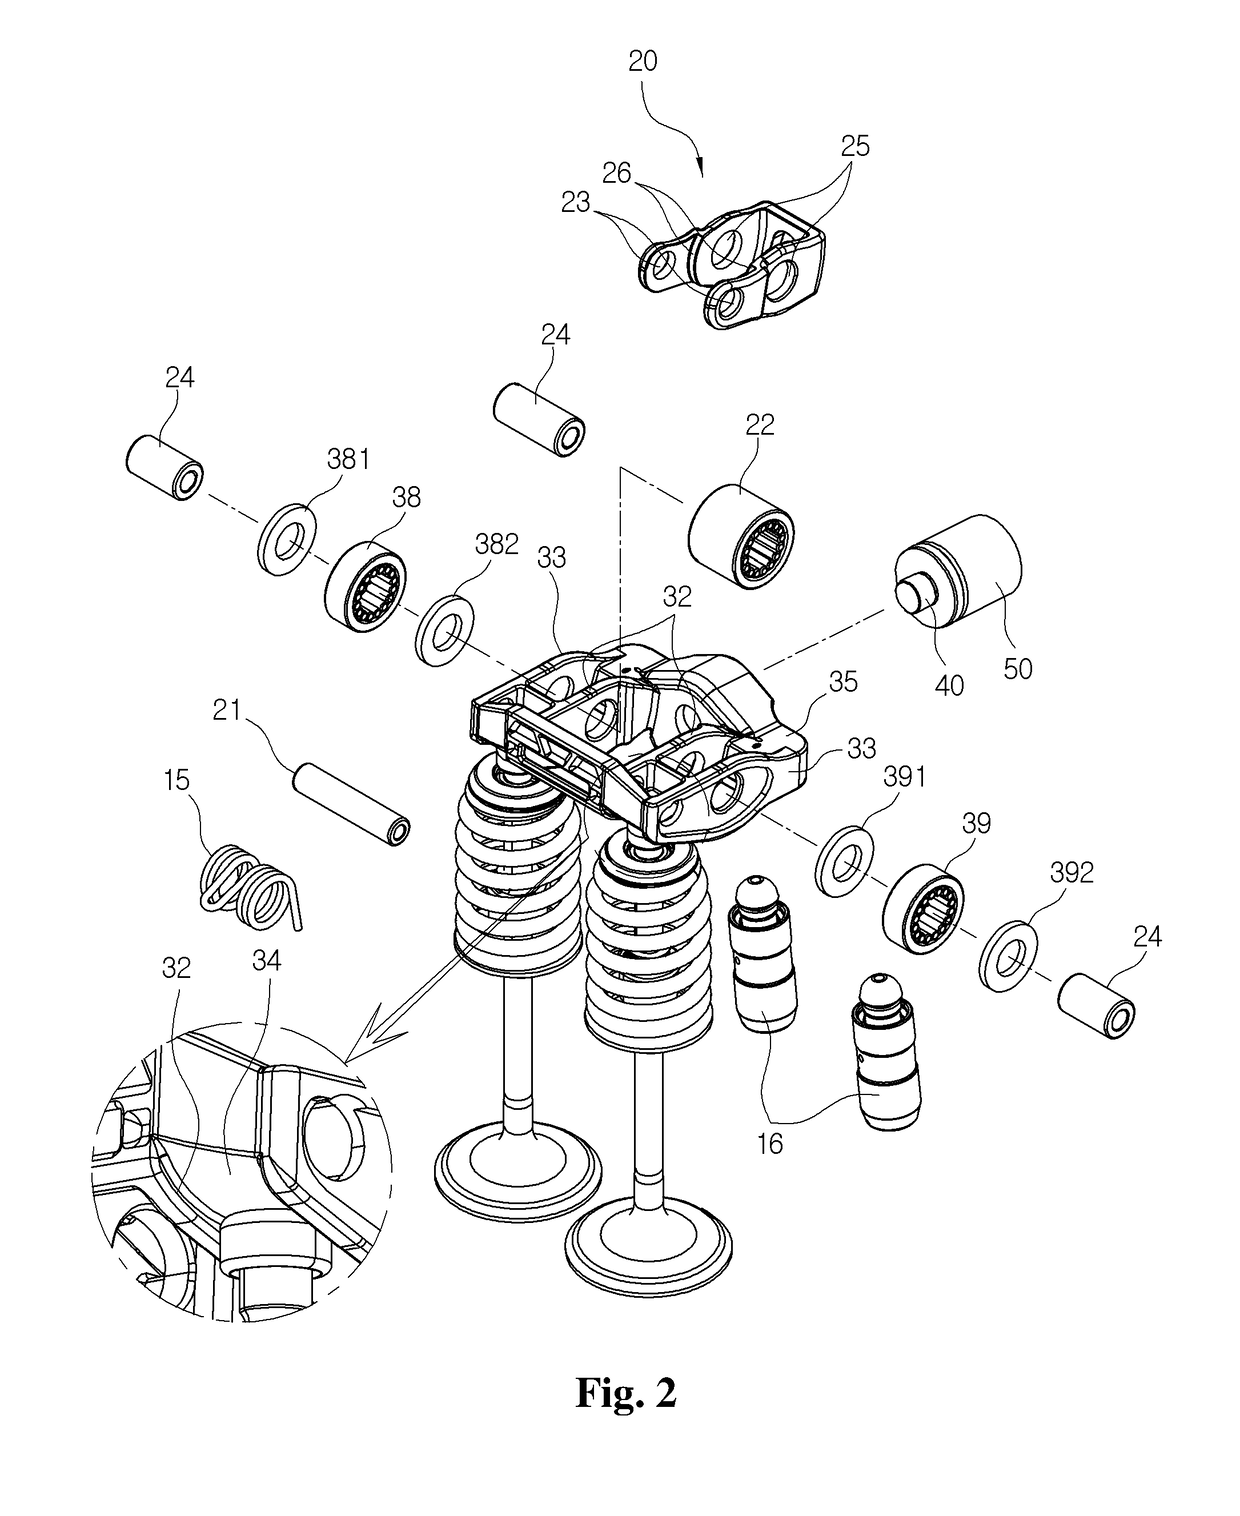 Variable valve lift actuator of engine